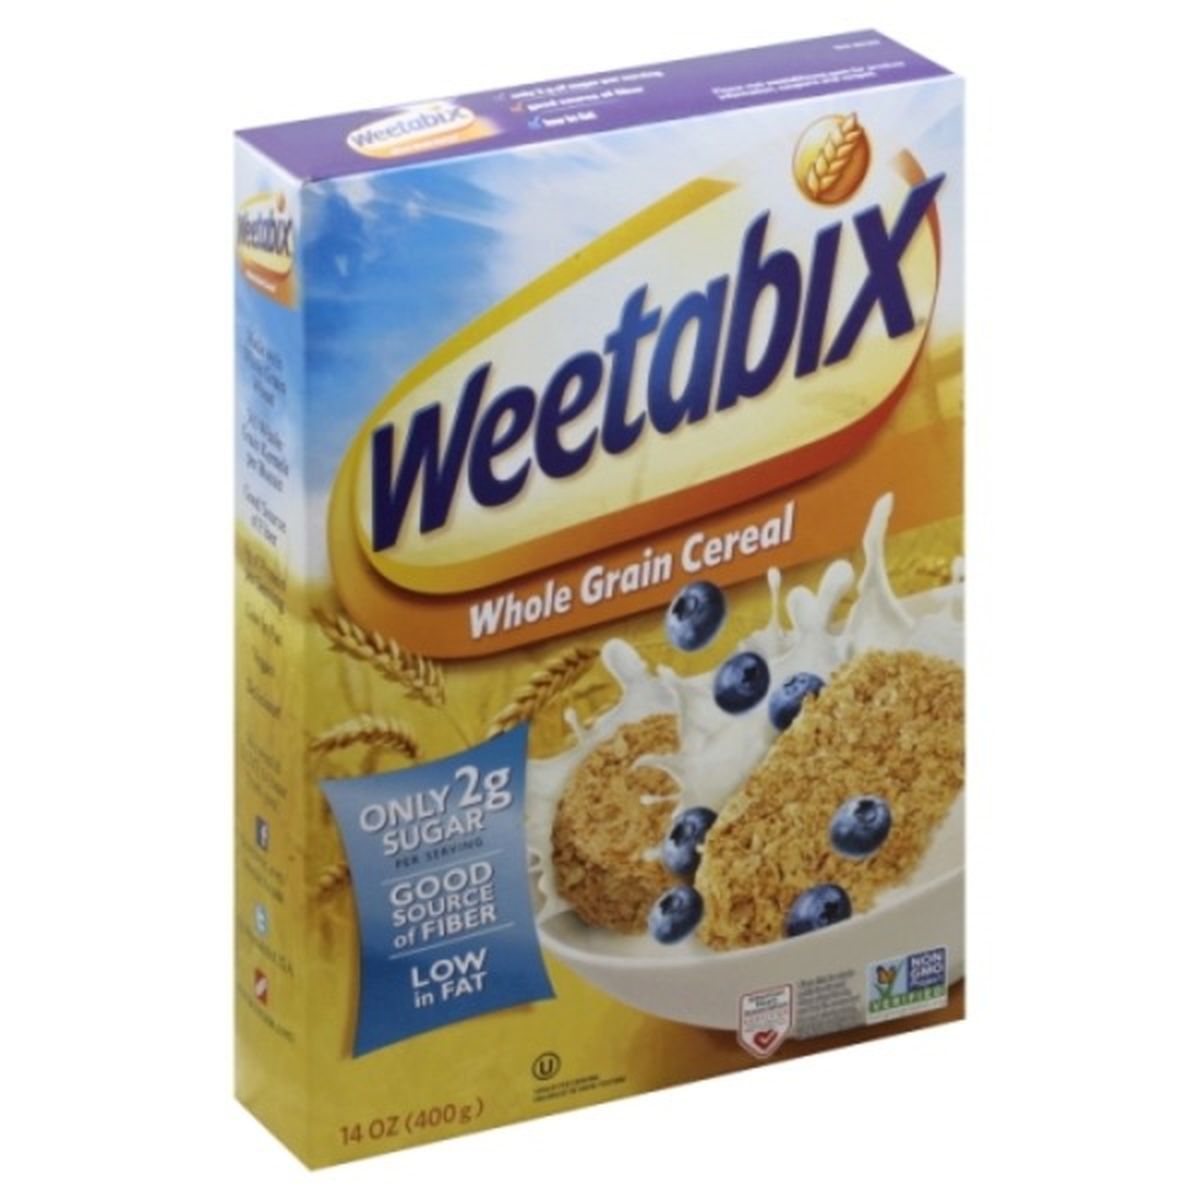 Calories in Weetabix Cereal, Whole Grain